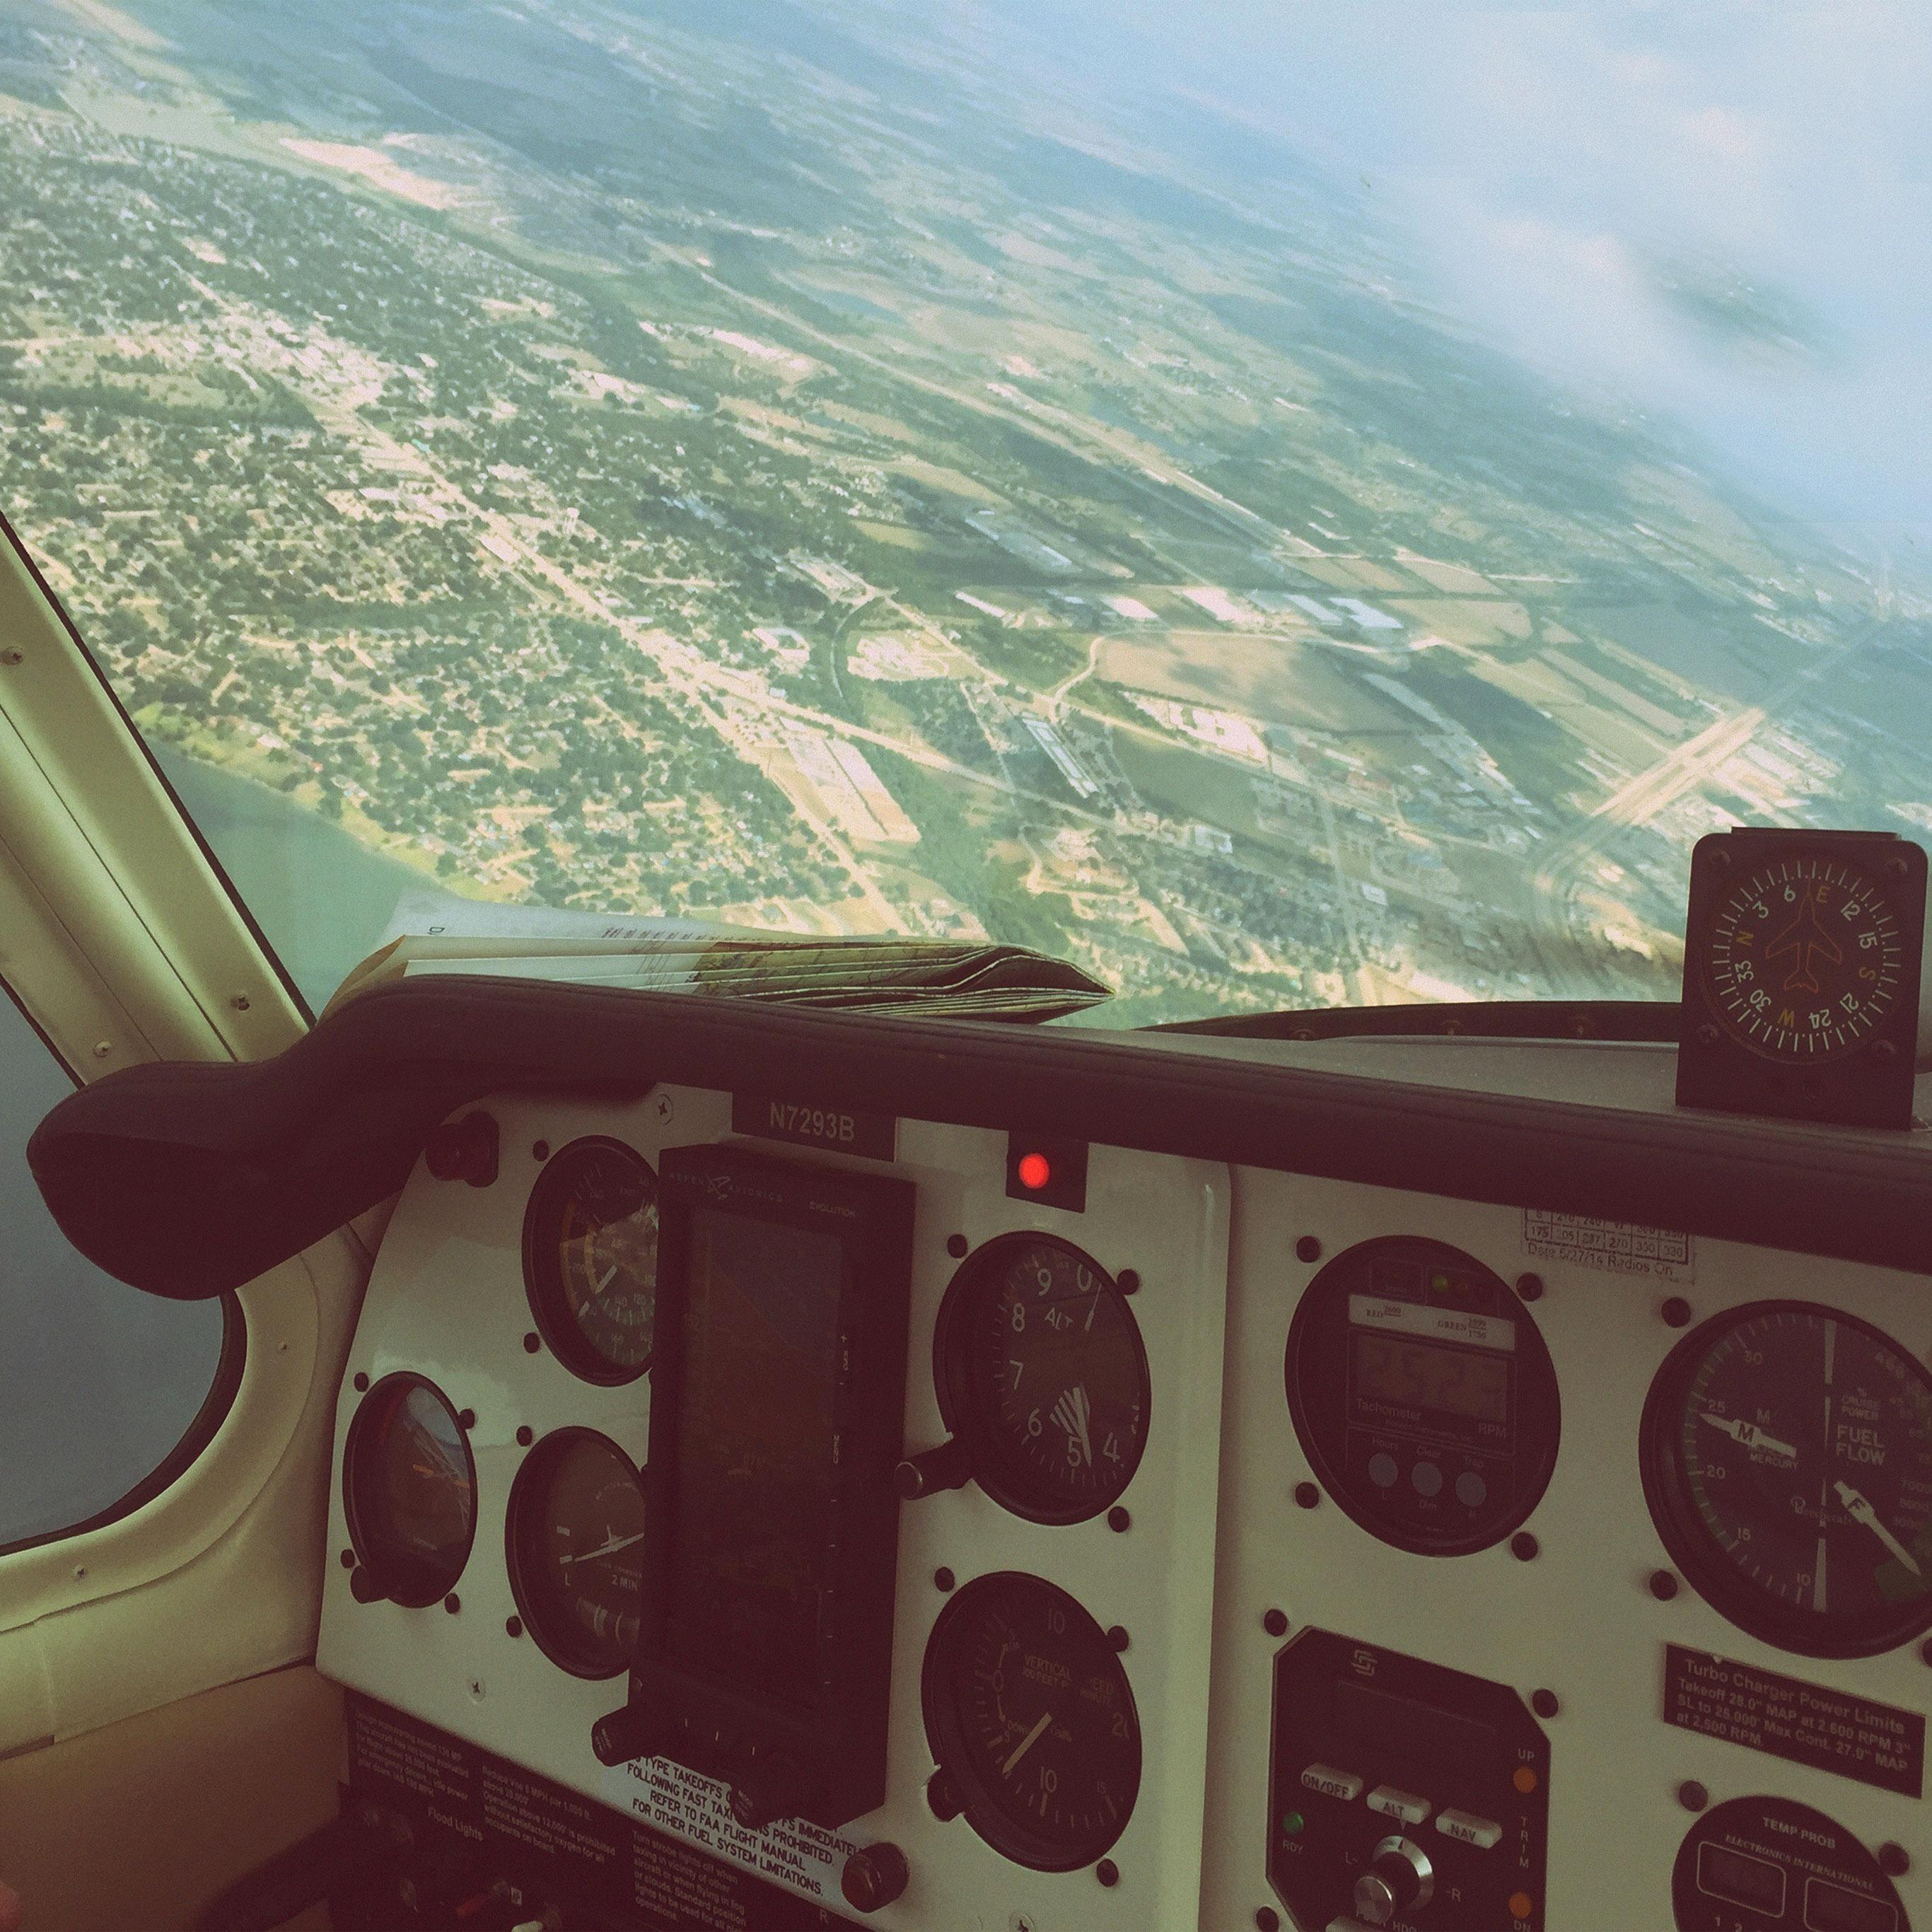 Plane Wallpaper For Android - Airplane Cockpit - HD Wallpaper 